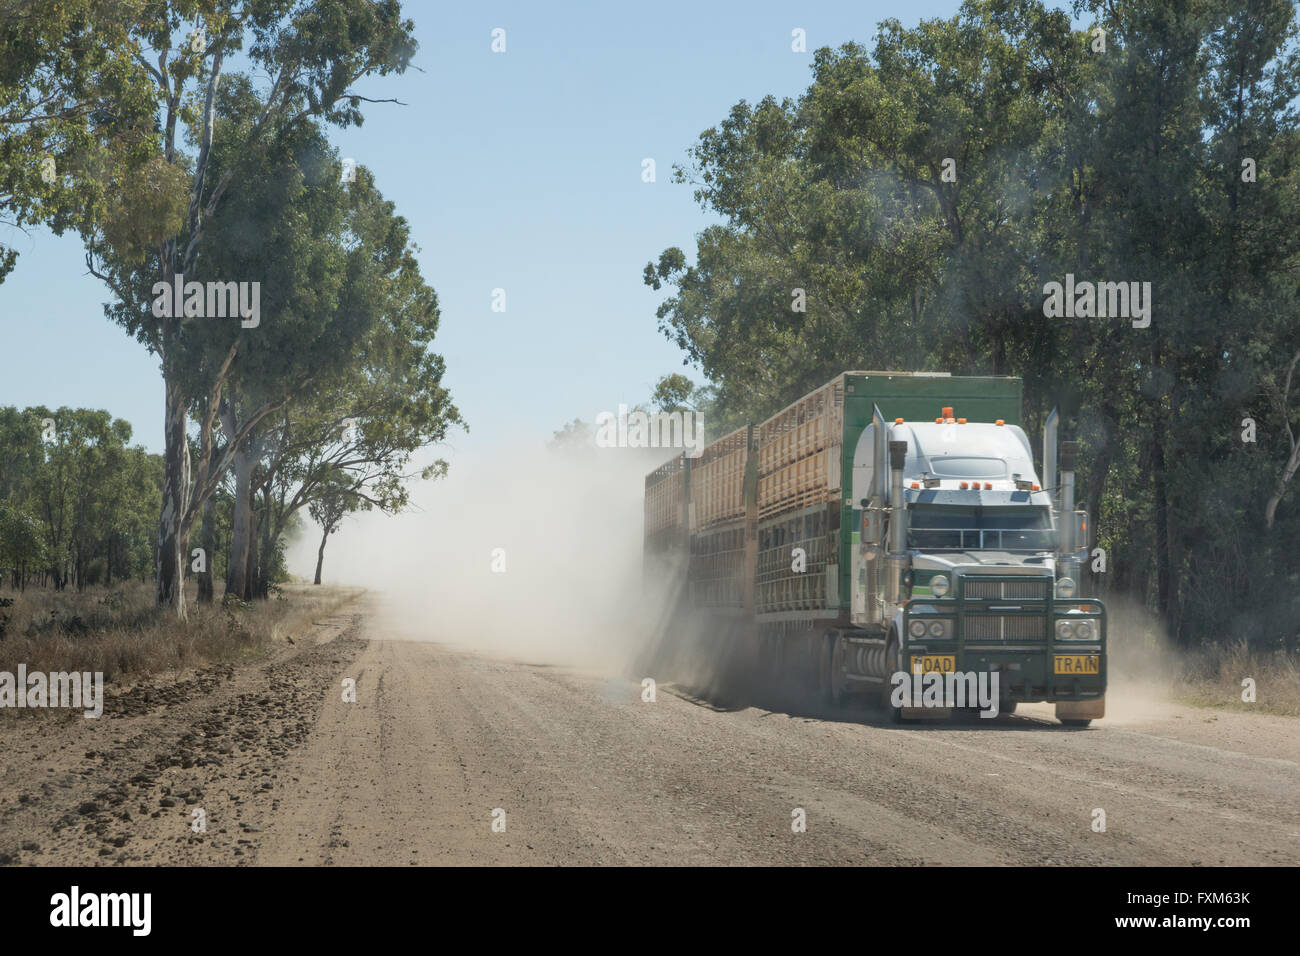 Semi-trailer road train truck carrying cattle driving on dusty unsealed outback road in Queensland, Australia Stock Photo